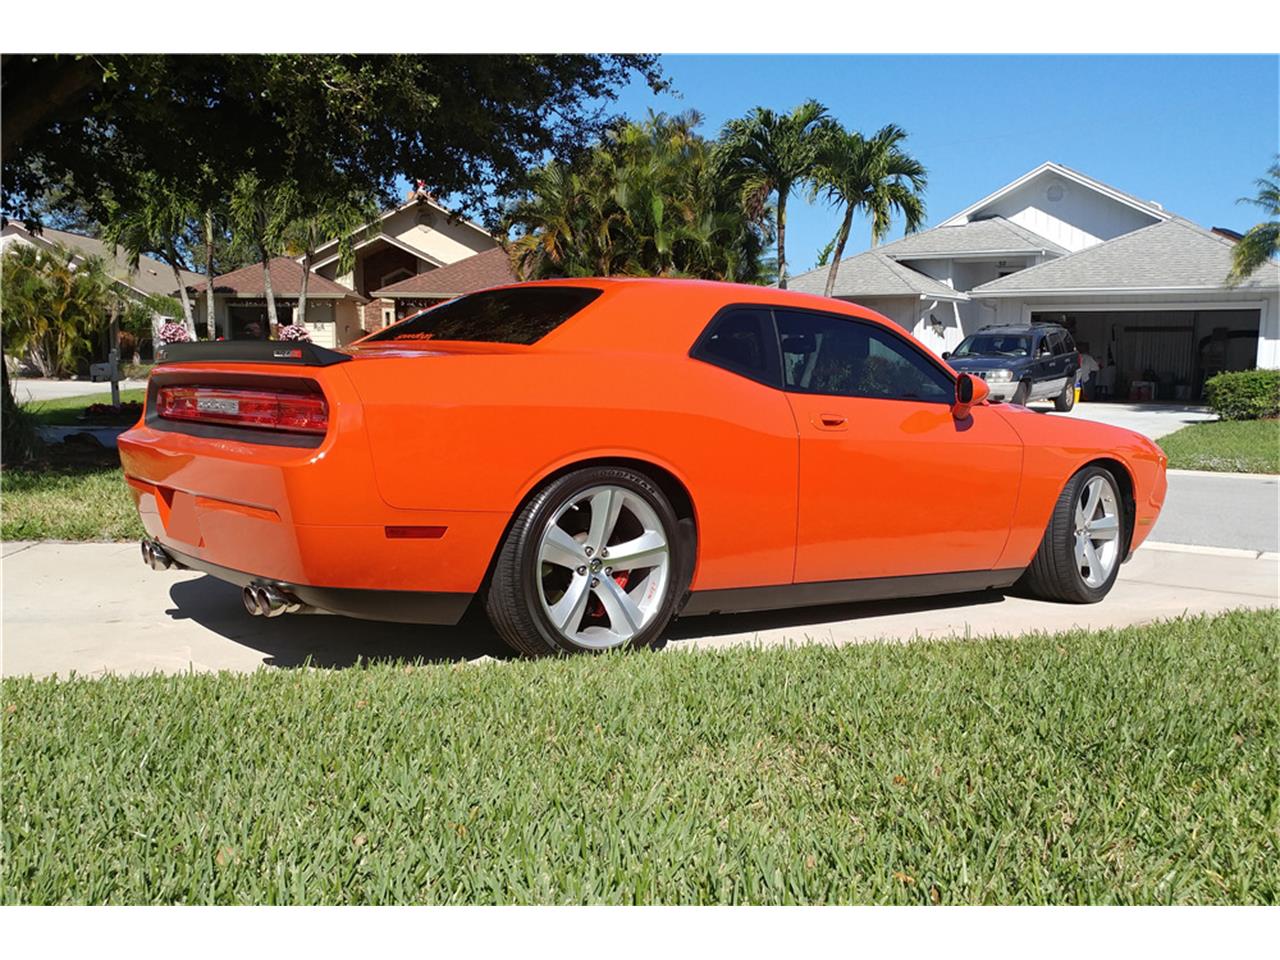 For Sale at Auction: 2008 Dodge Challenger for sale in West Palm Beach, FL